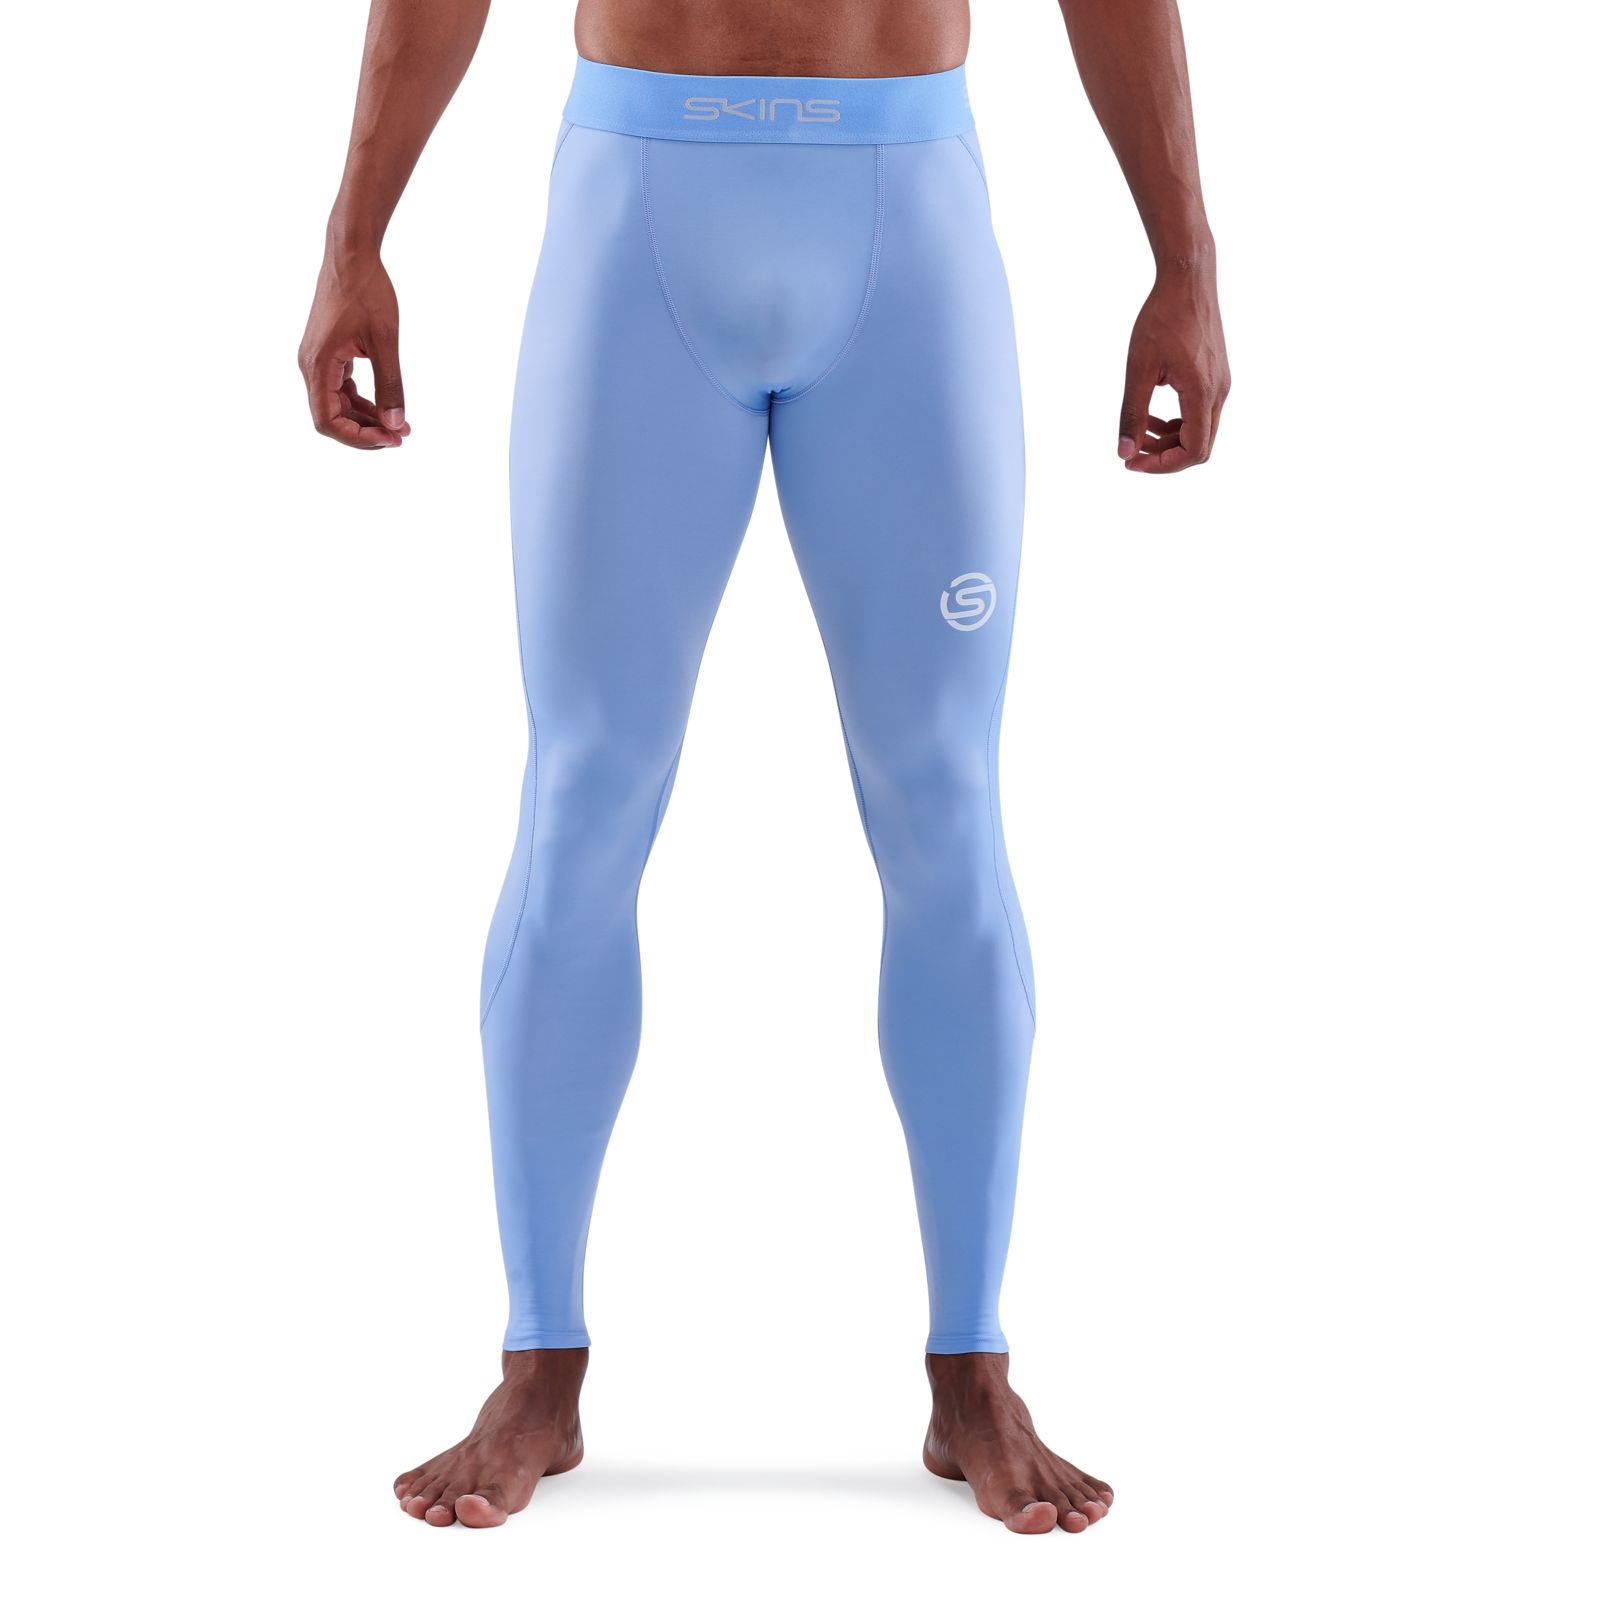 Compression Tights for Runners - Best Compression Leggings 2022 - Blue Knee  Length Dress